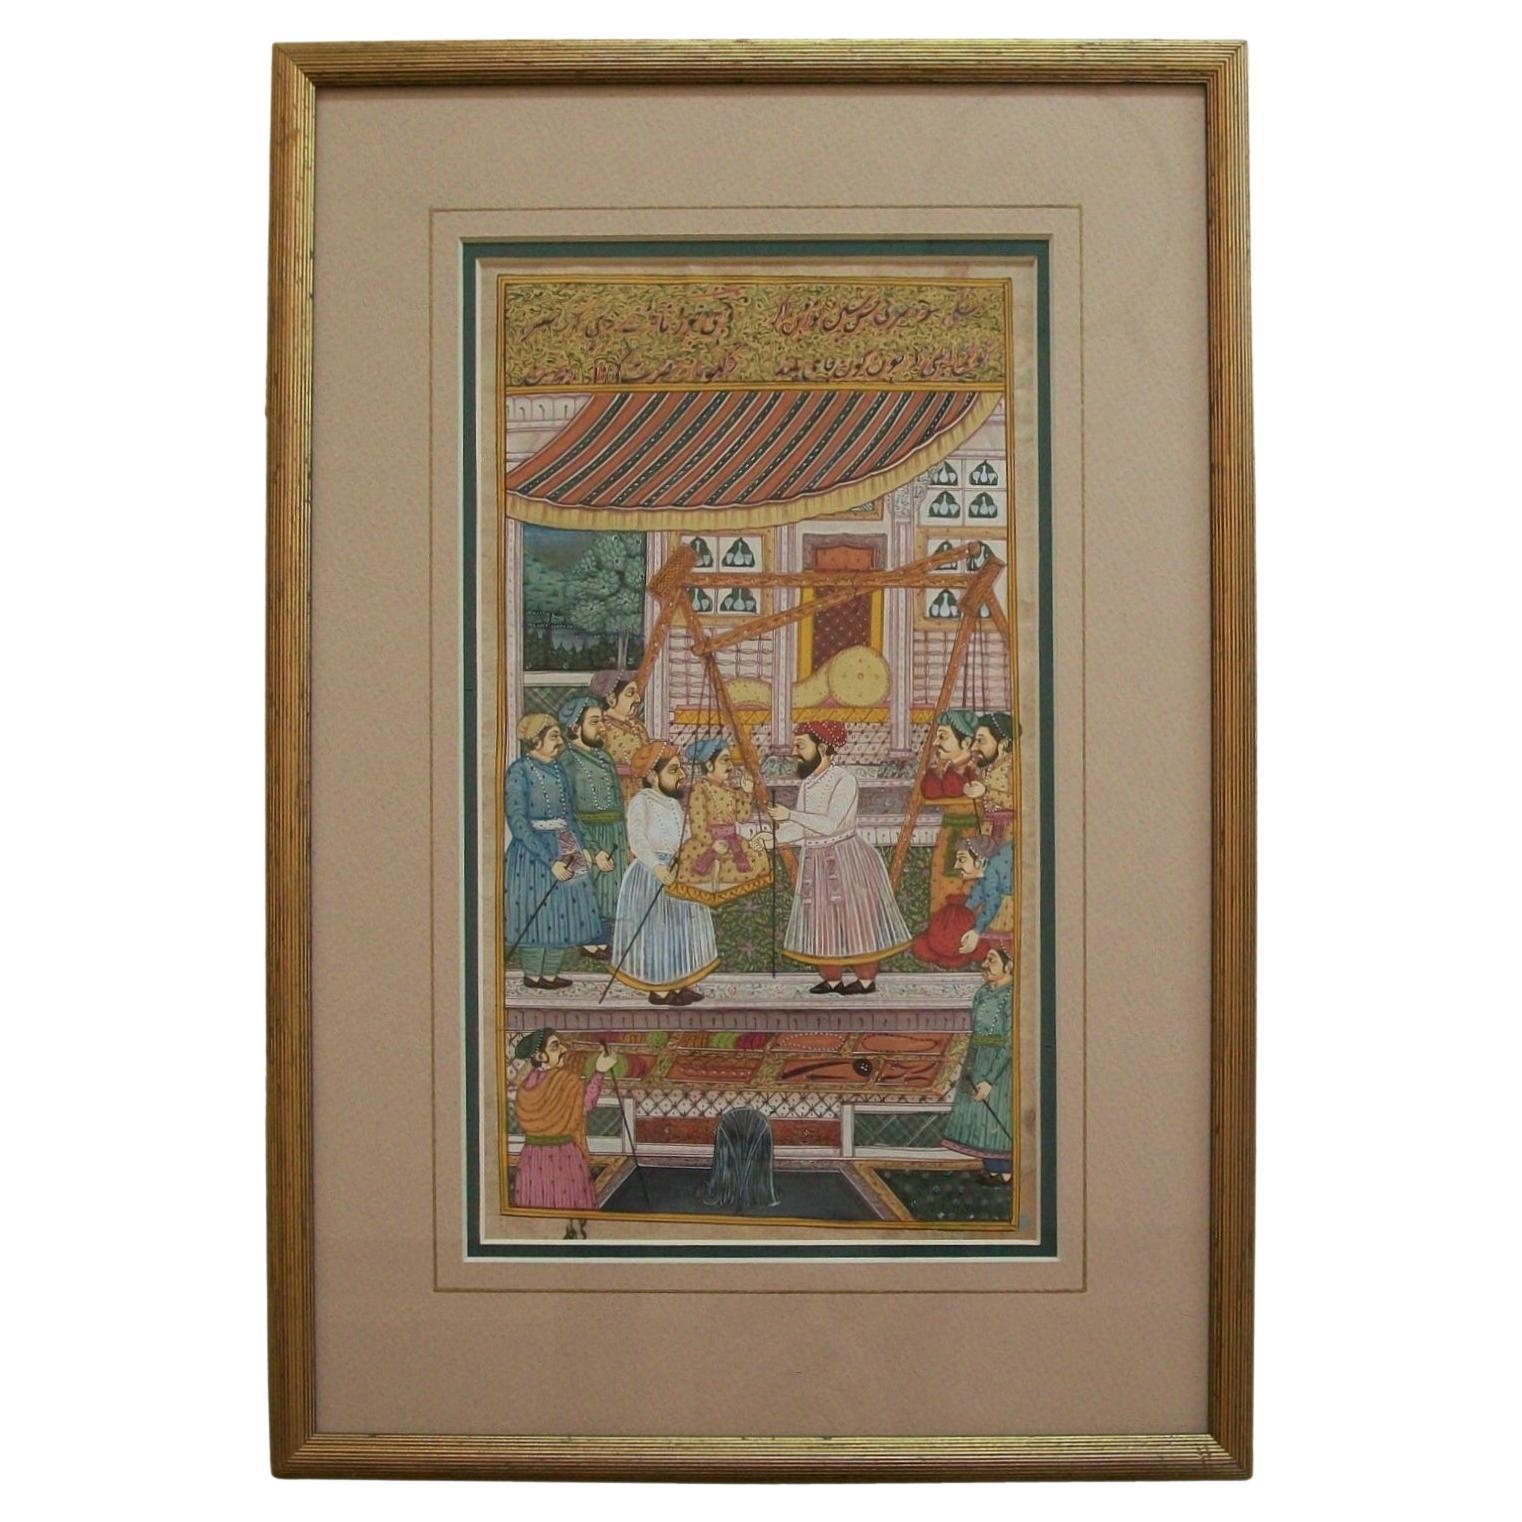 Mughal Style Miniature Court Scene Painting - Framed - India - 20th Century